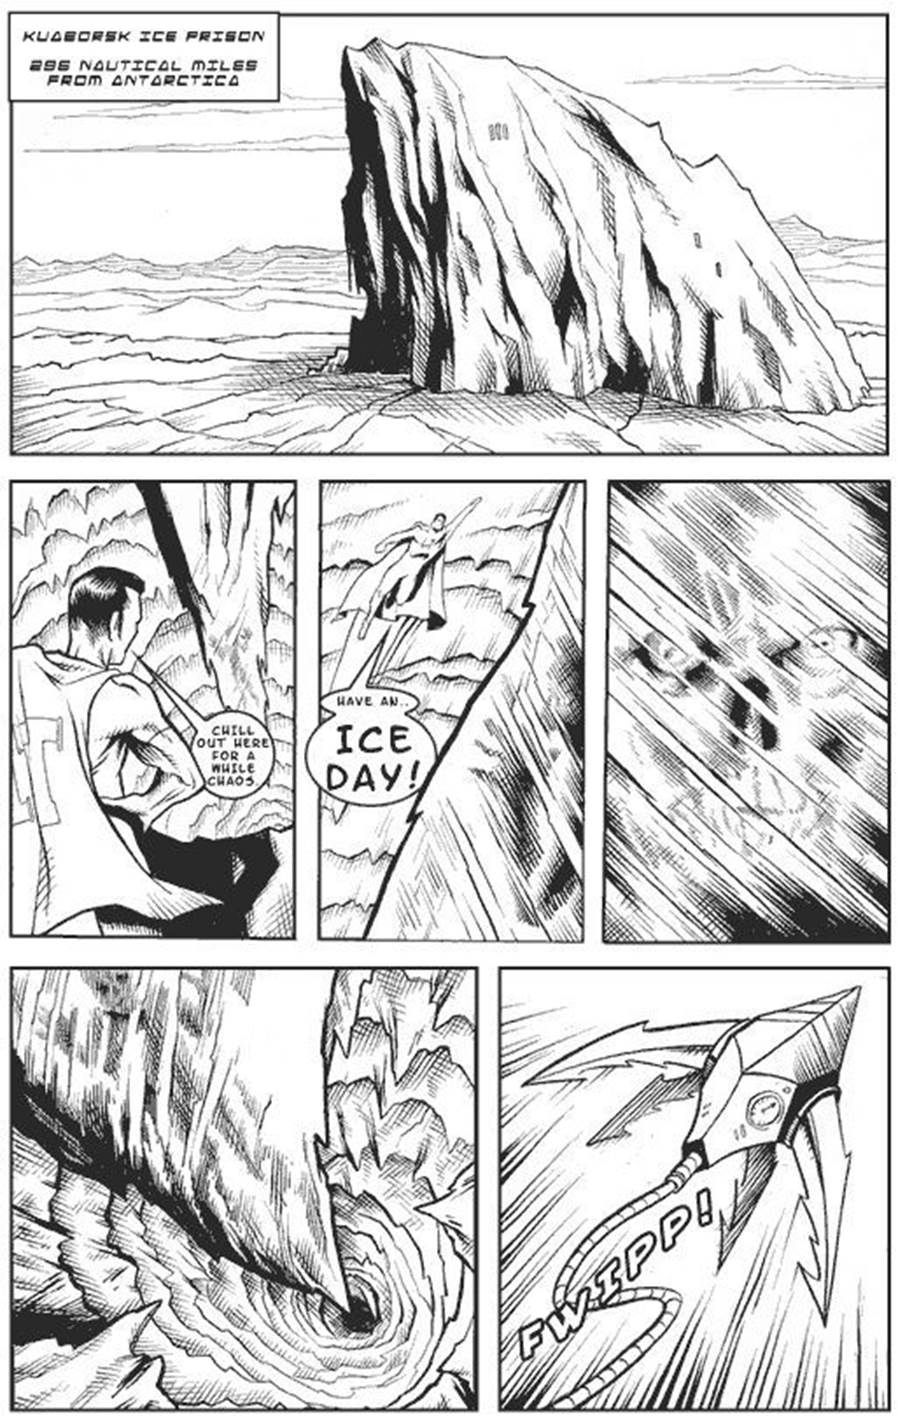 Page from graphic novel